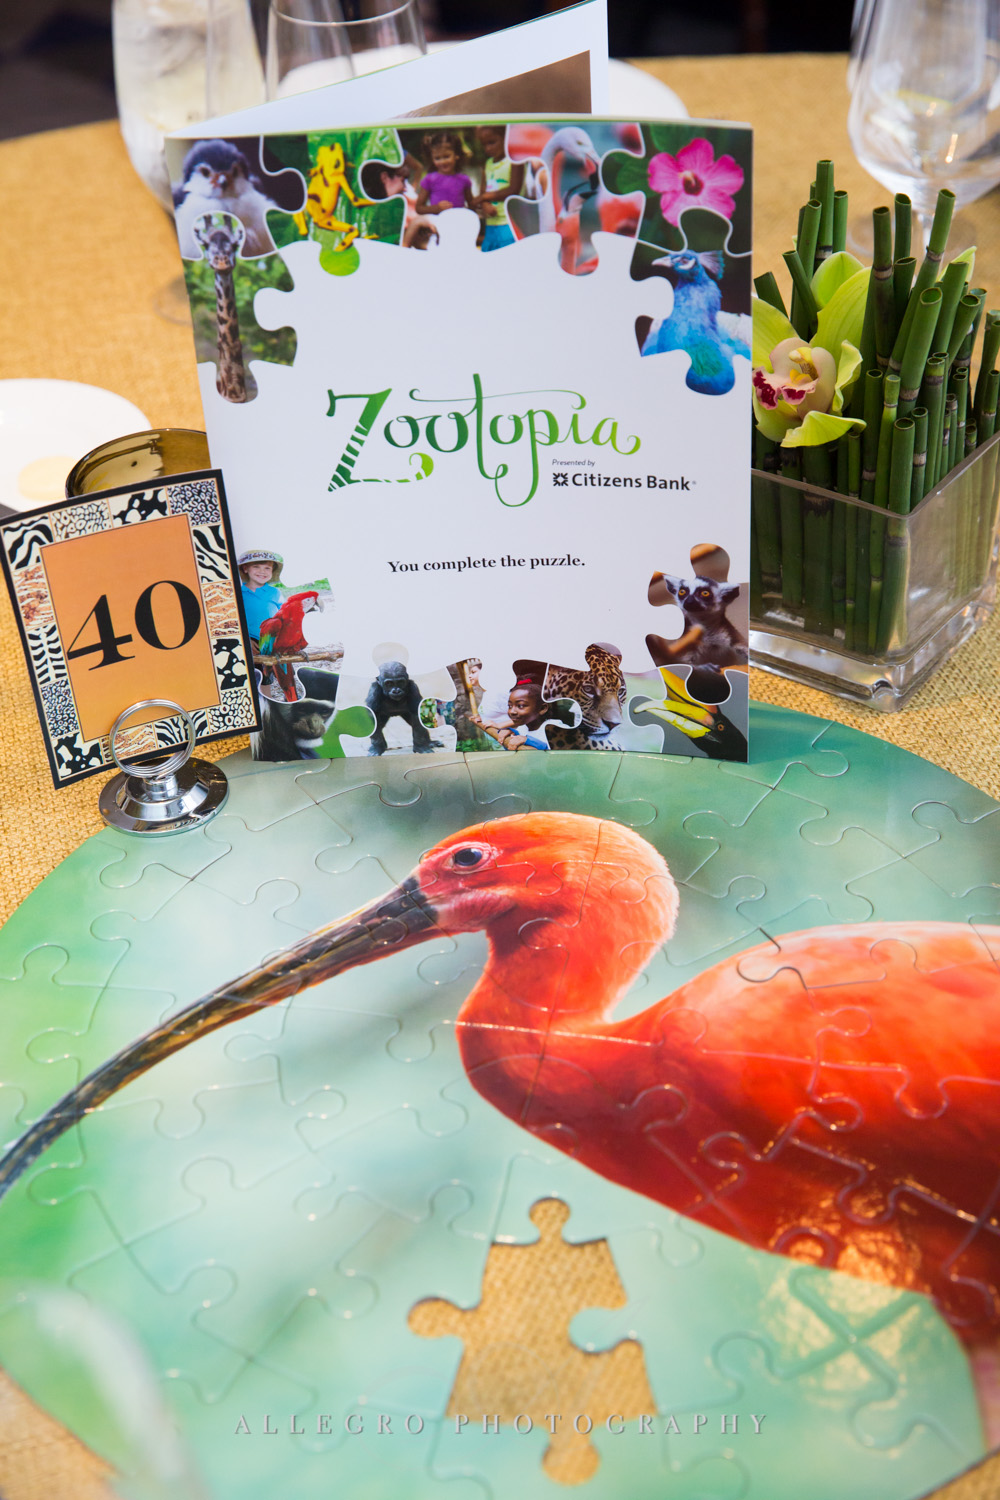 new england zoo event - photographed by allegro photography